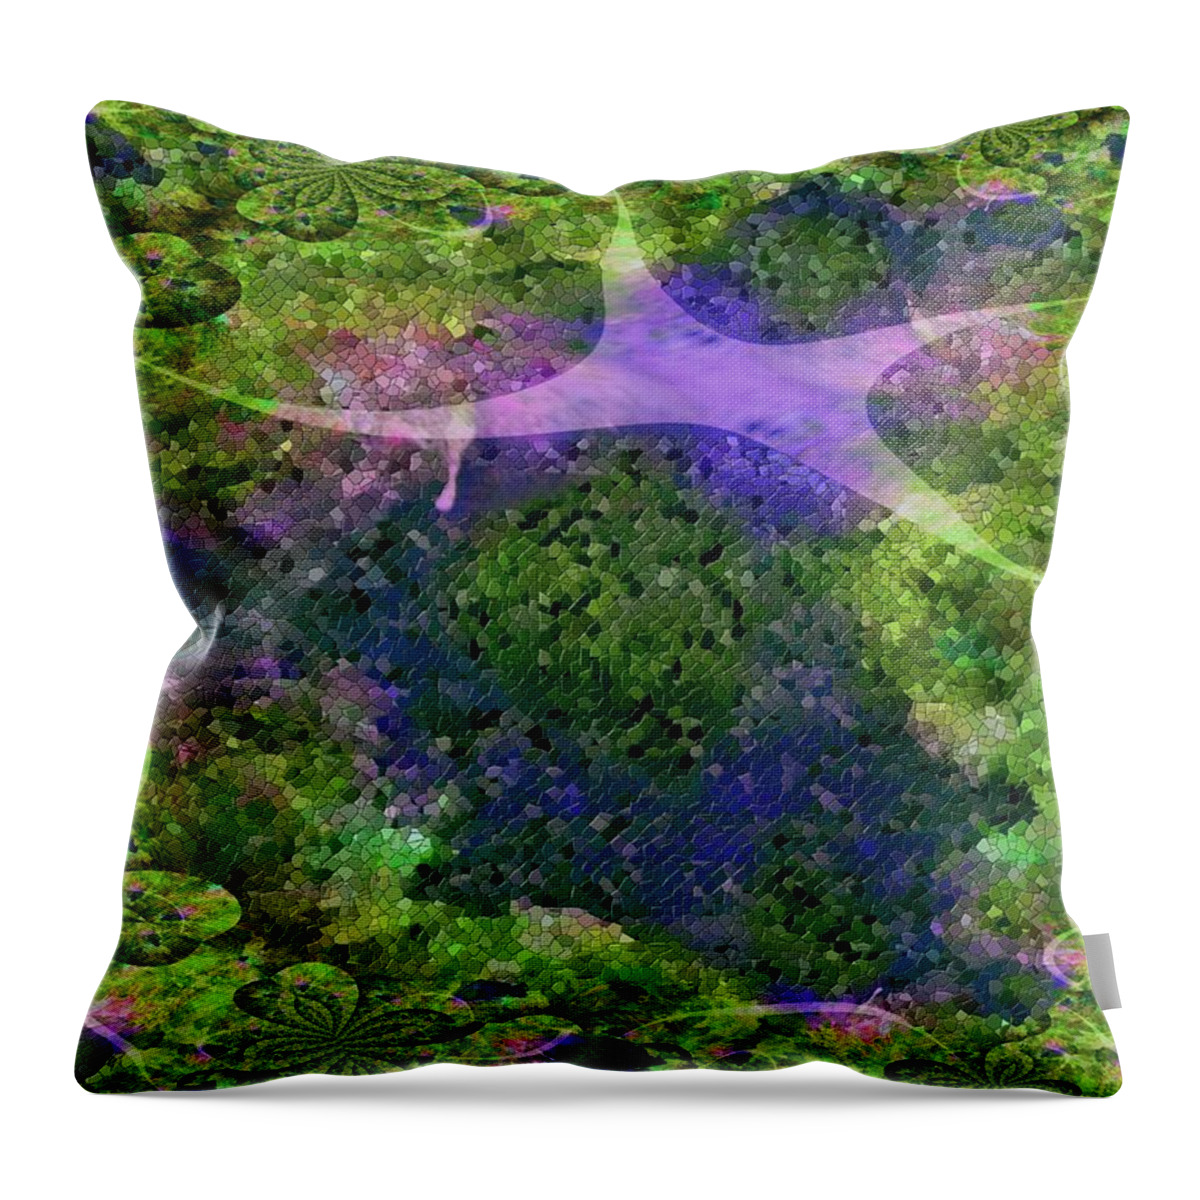 Mosaic Throw Pillow featuring the digital art Make a Wish by Claire Bull